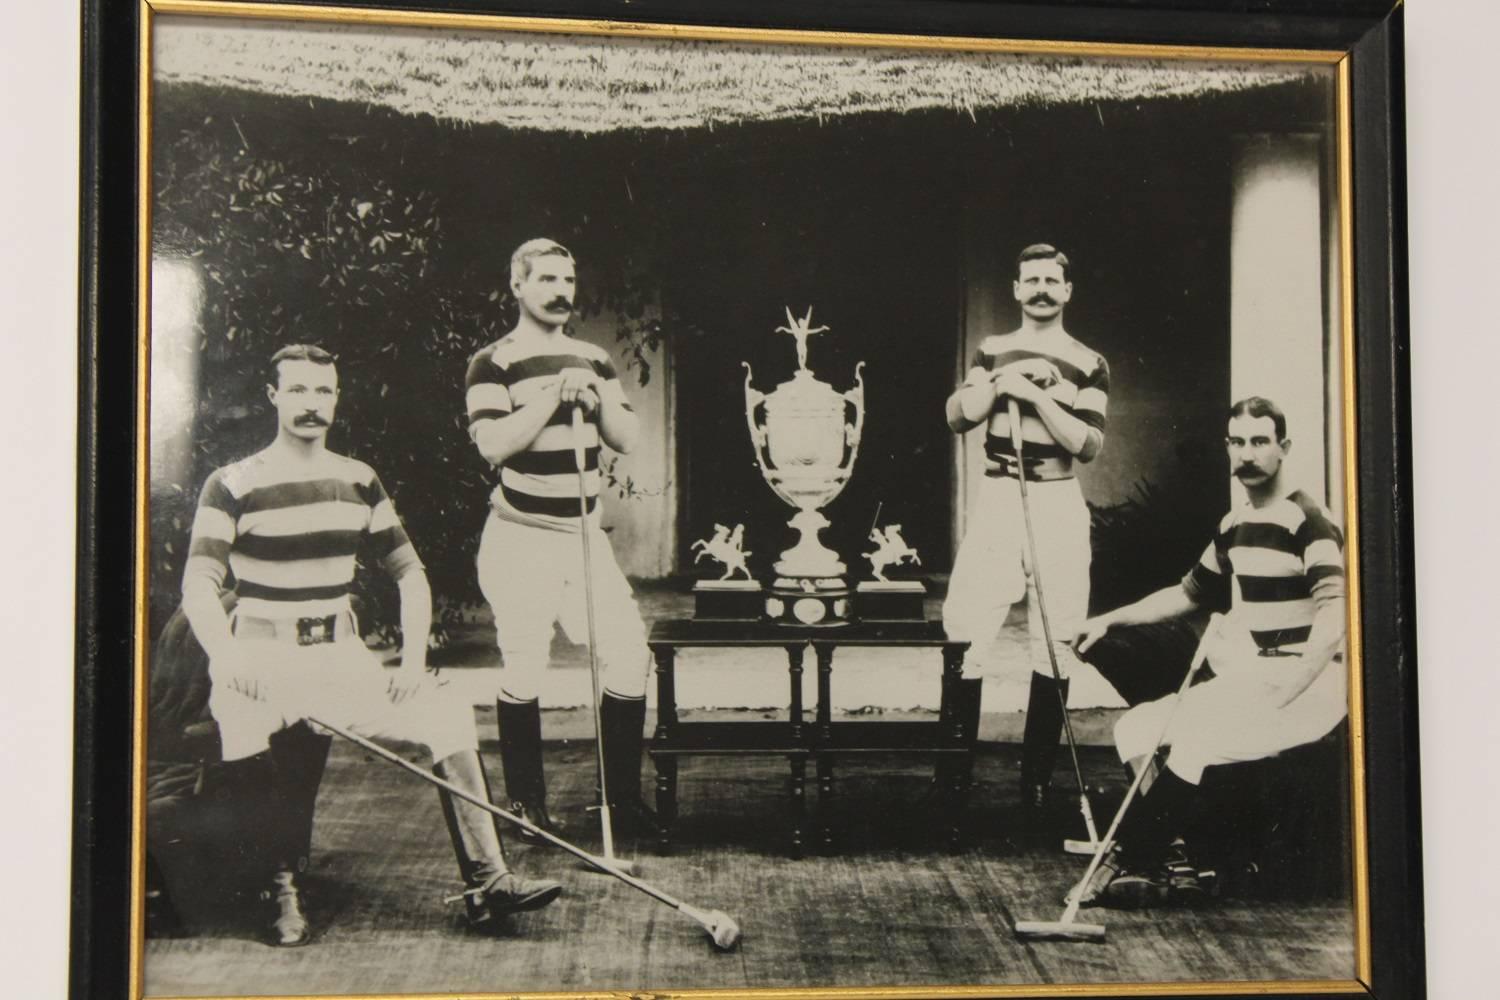 Vintage photo of polo players.